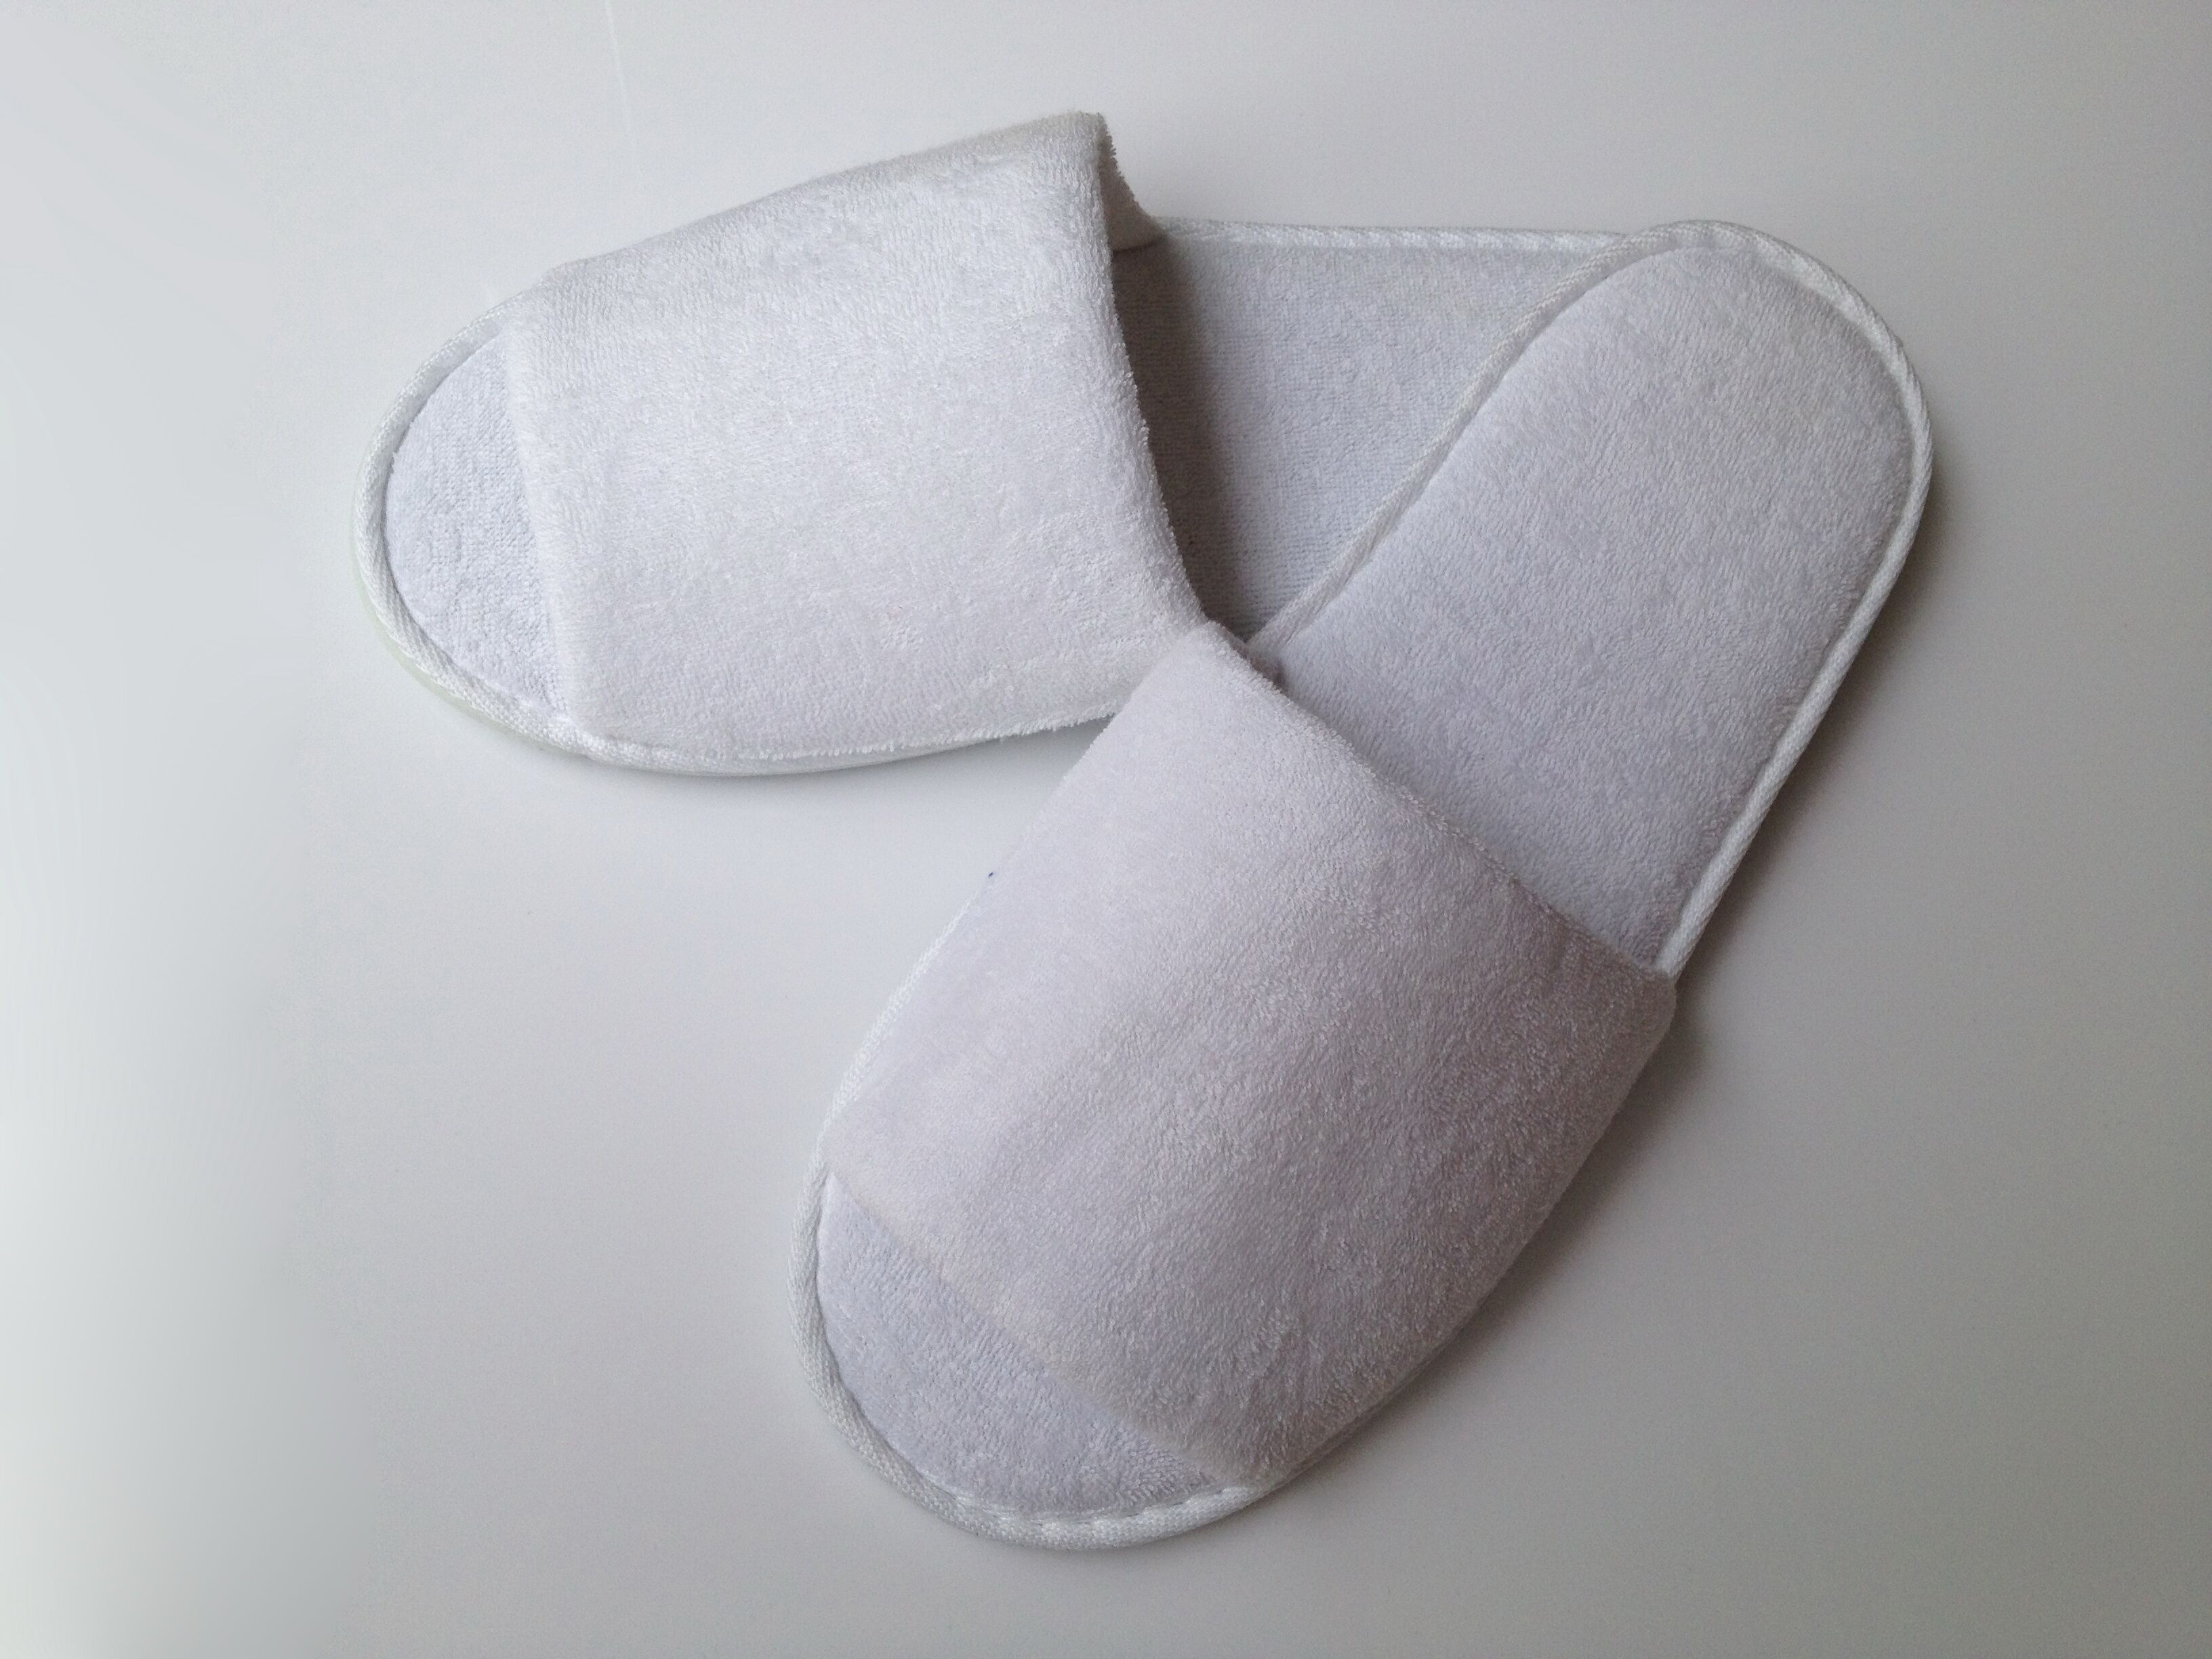 cheap hotel slippers